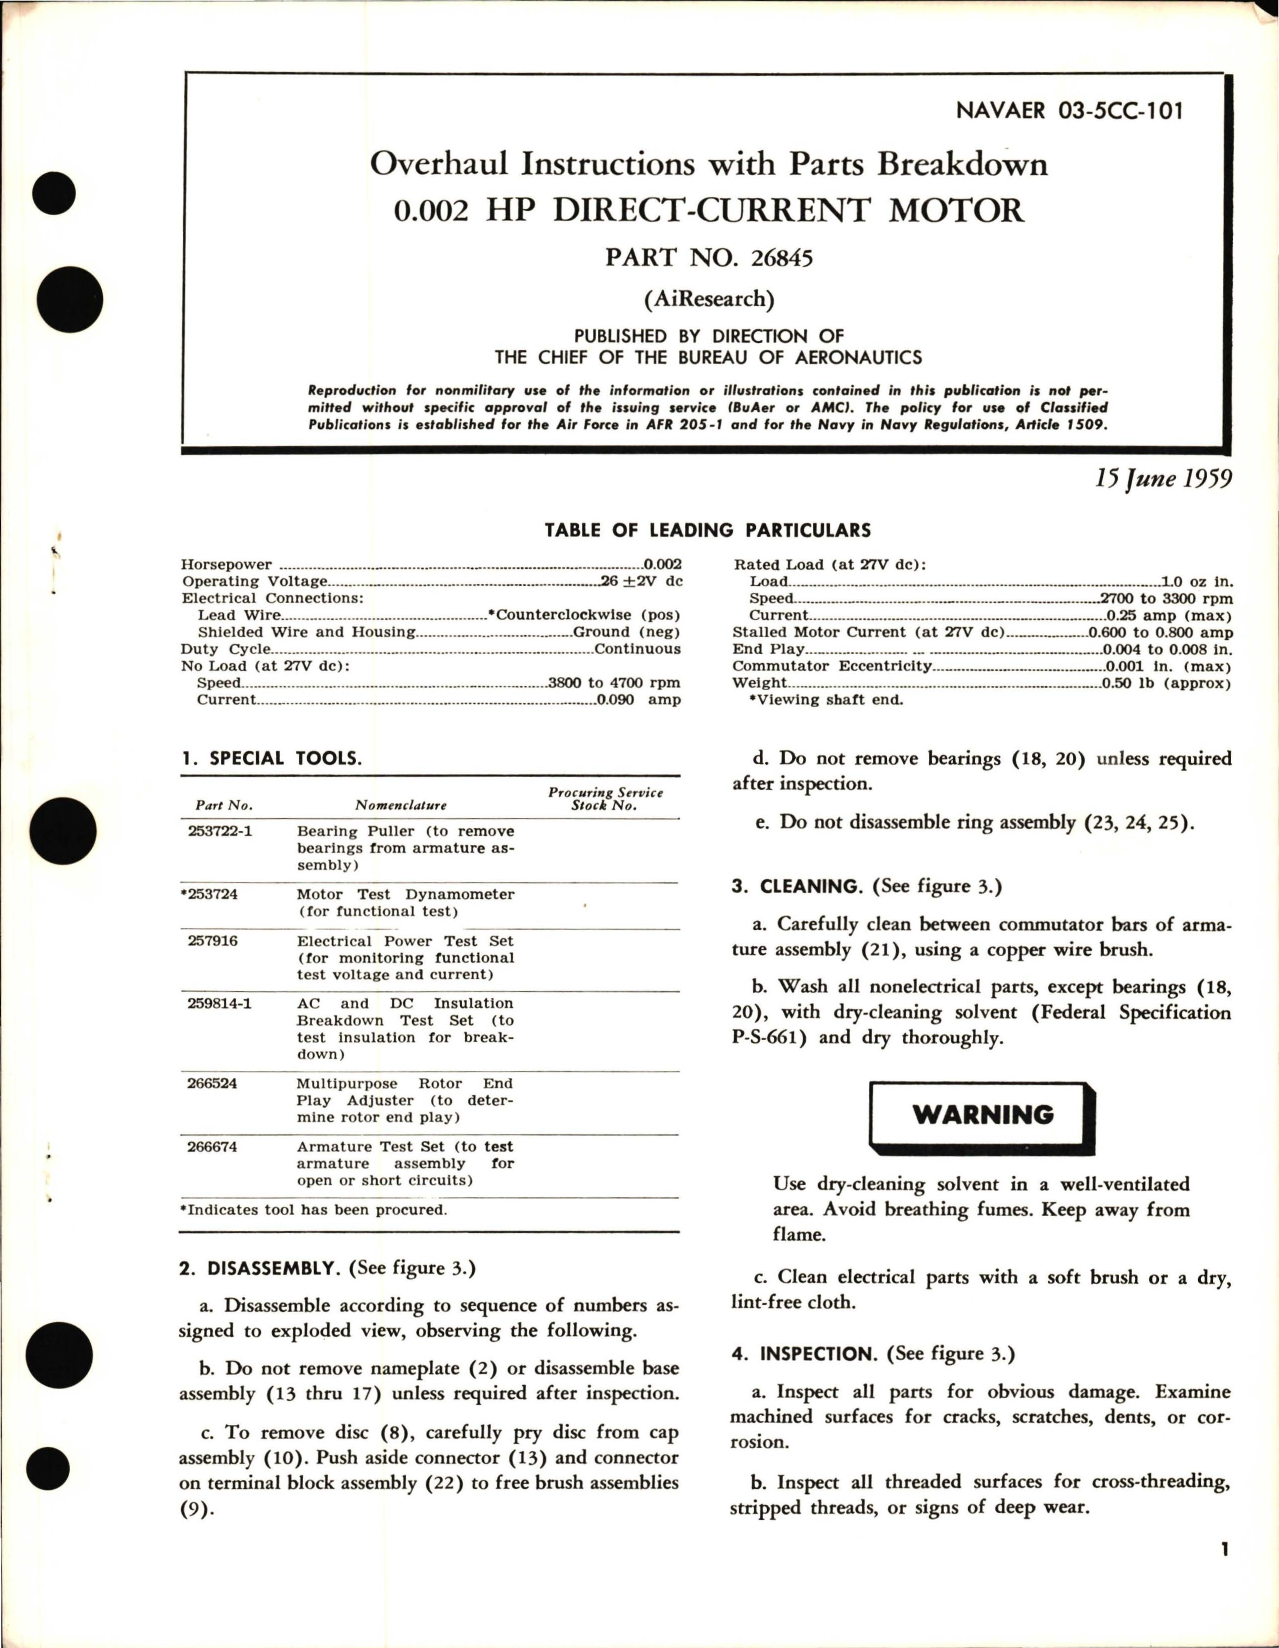 Sample page 1 from AirCorps Library document: Overhaul Instructions with Parts Breakdown for HP Direct Current Motor 0.002 Part 26845